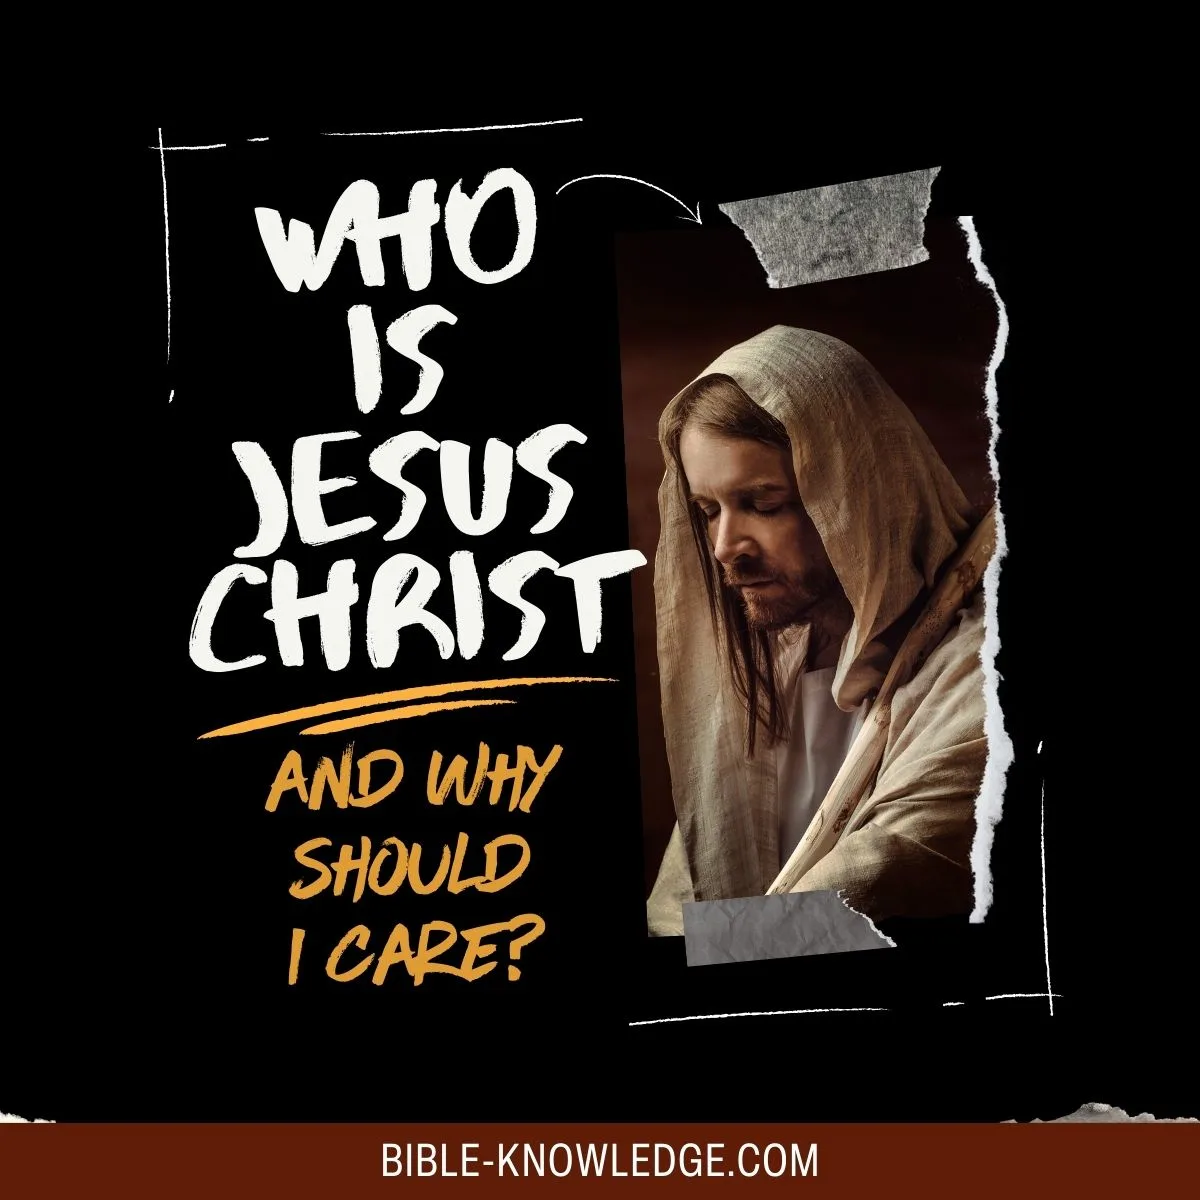 Who Is Jesus Christ and Why Should I Care?